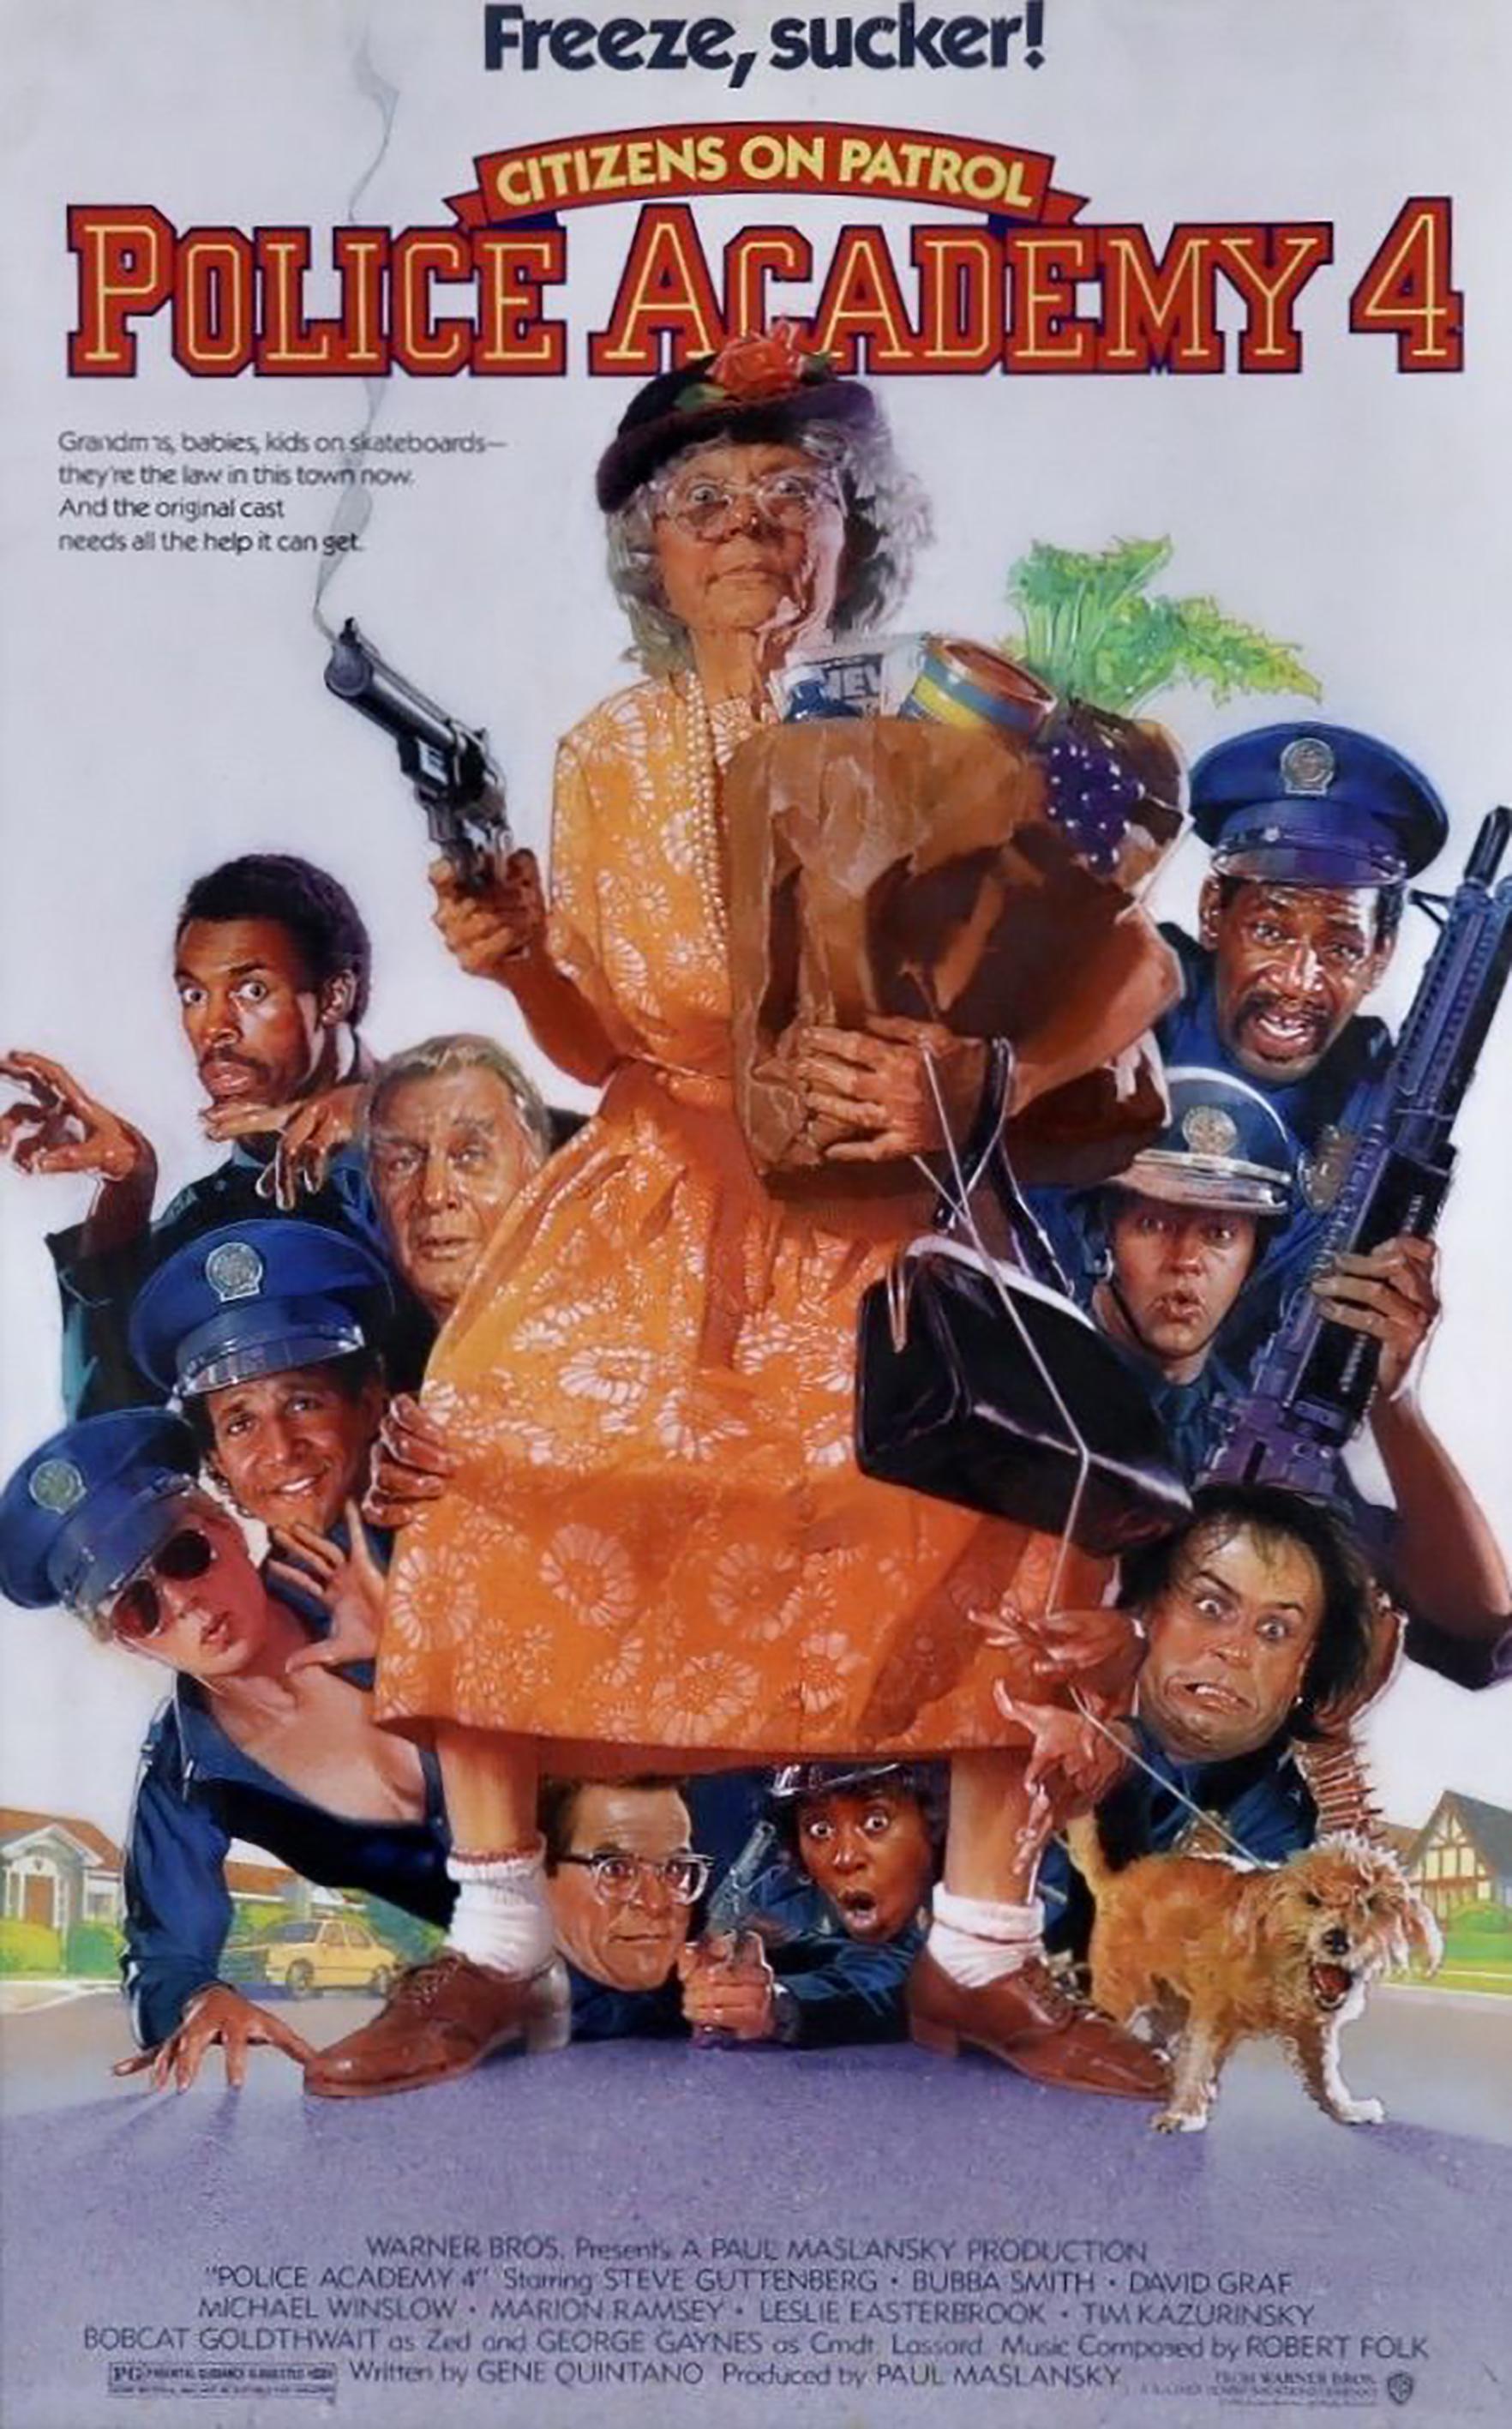 Morgan Weistling Figurative Painting - Police Academy 4, Poster Illustration